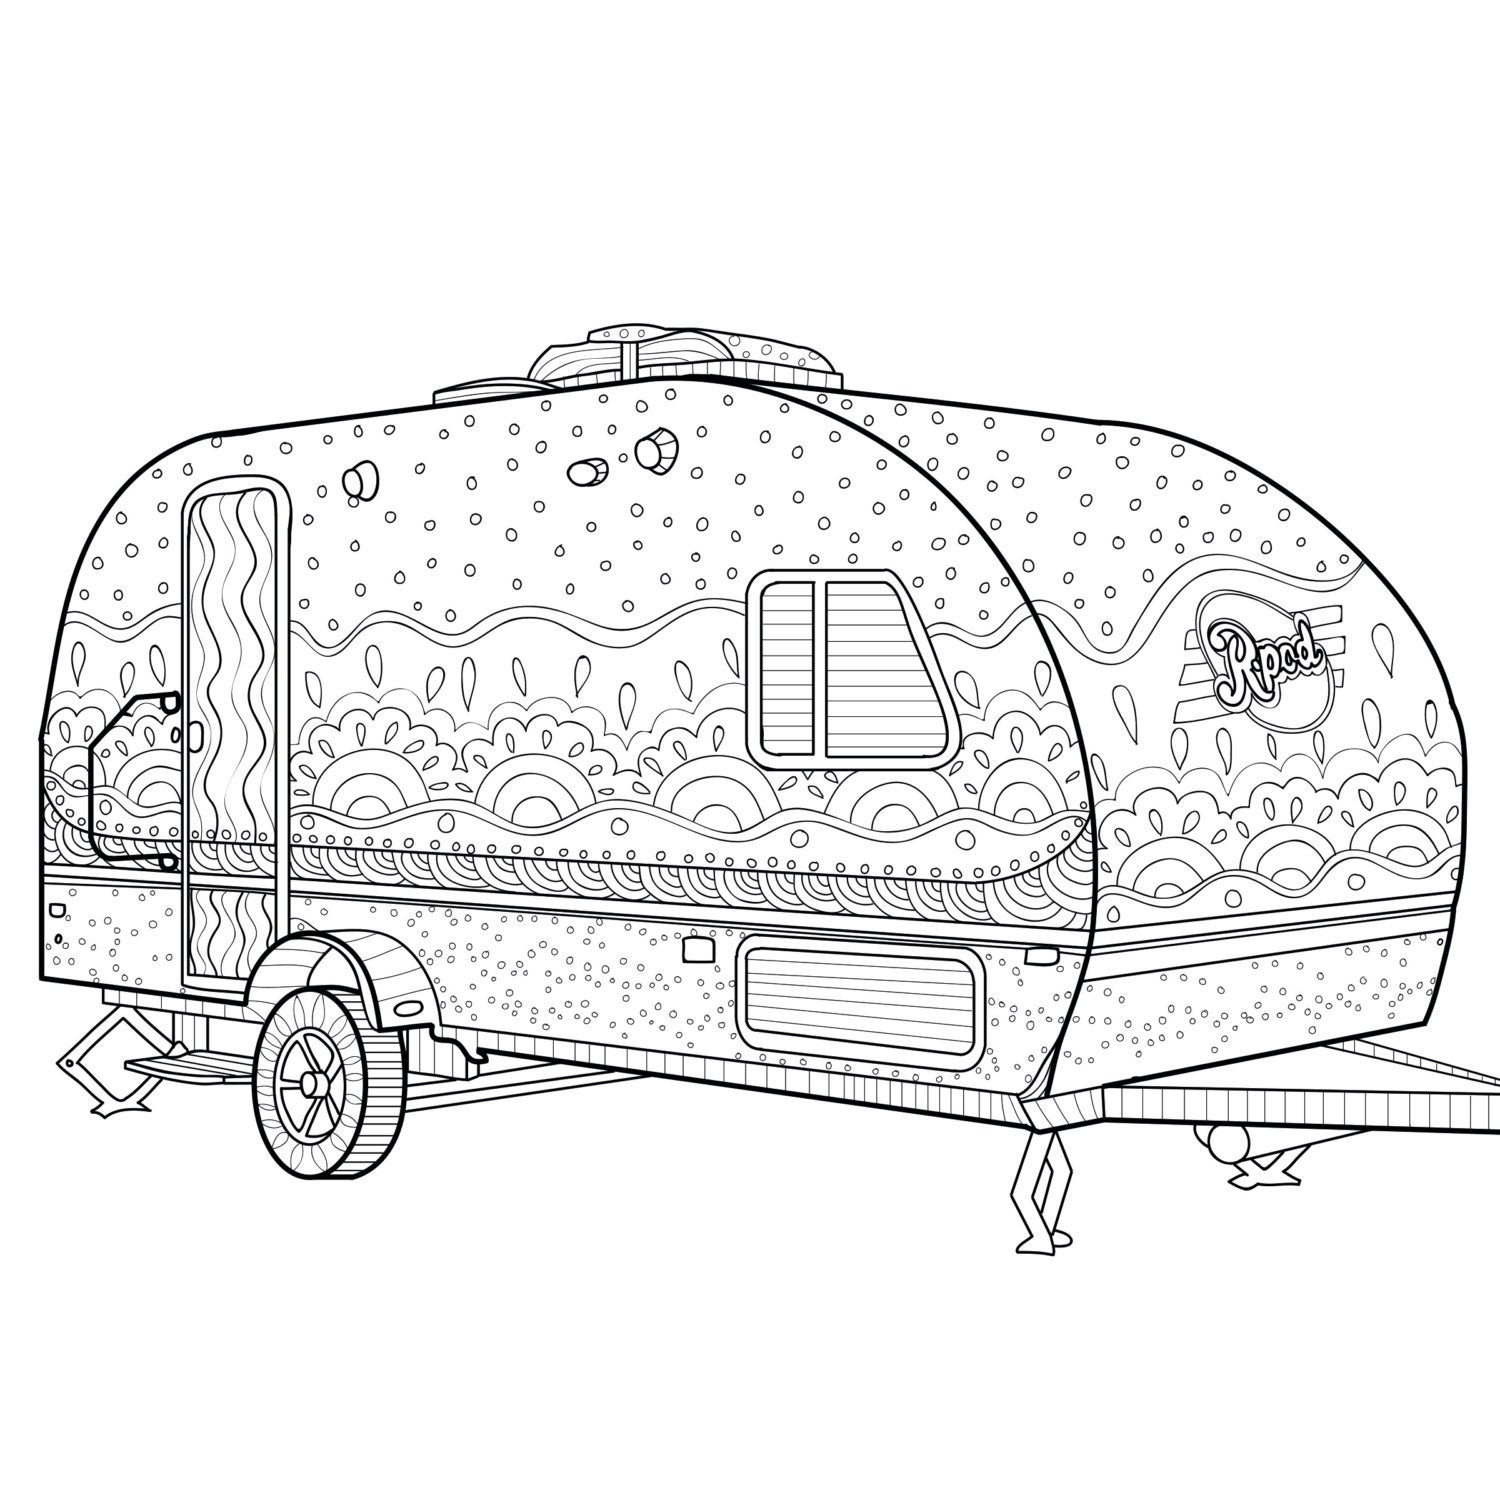 Camping Coloring Pages Printable
 Printable Coloring Page Zentangle Camping Coloring Book